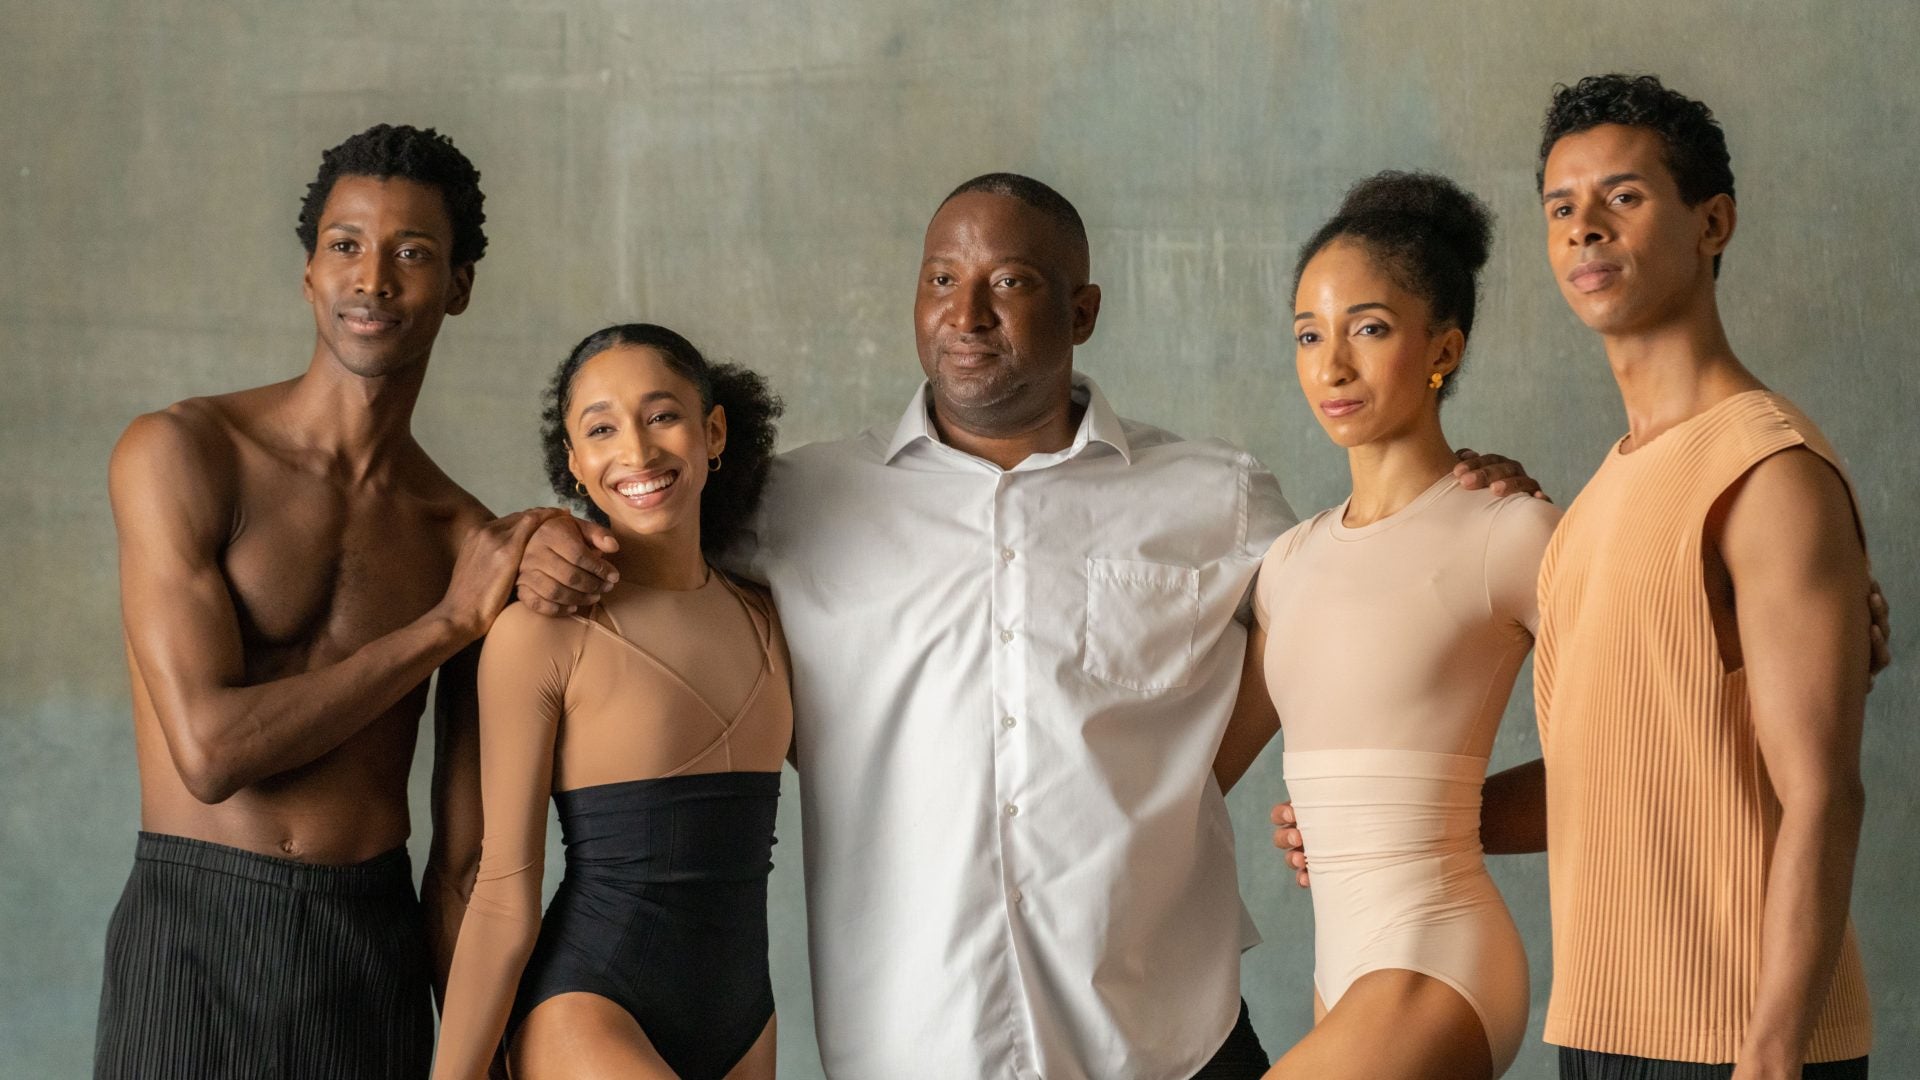 Christopher Rudd Breaks Ground With First All-Black Production At American Ballet Theater